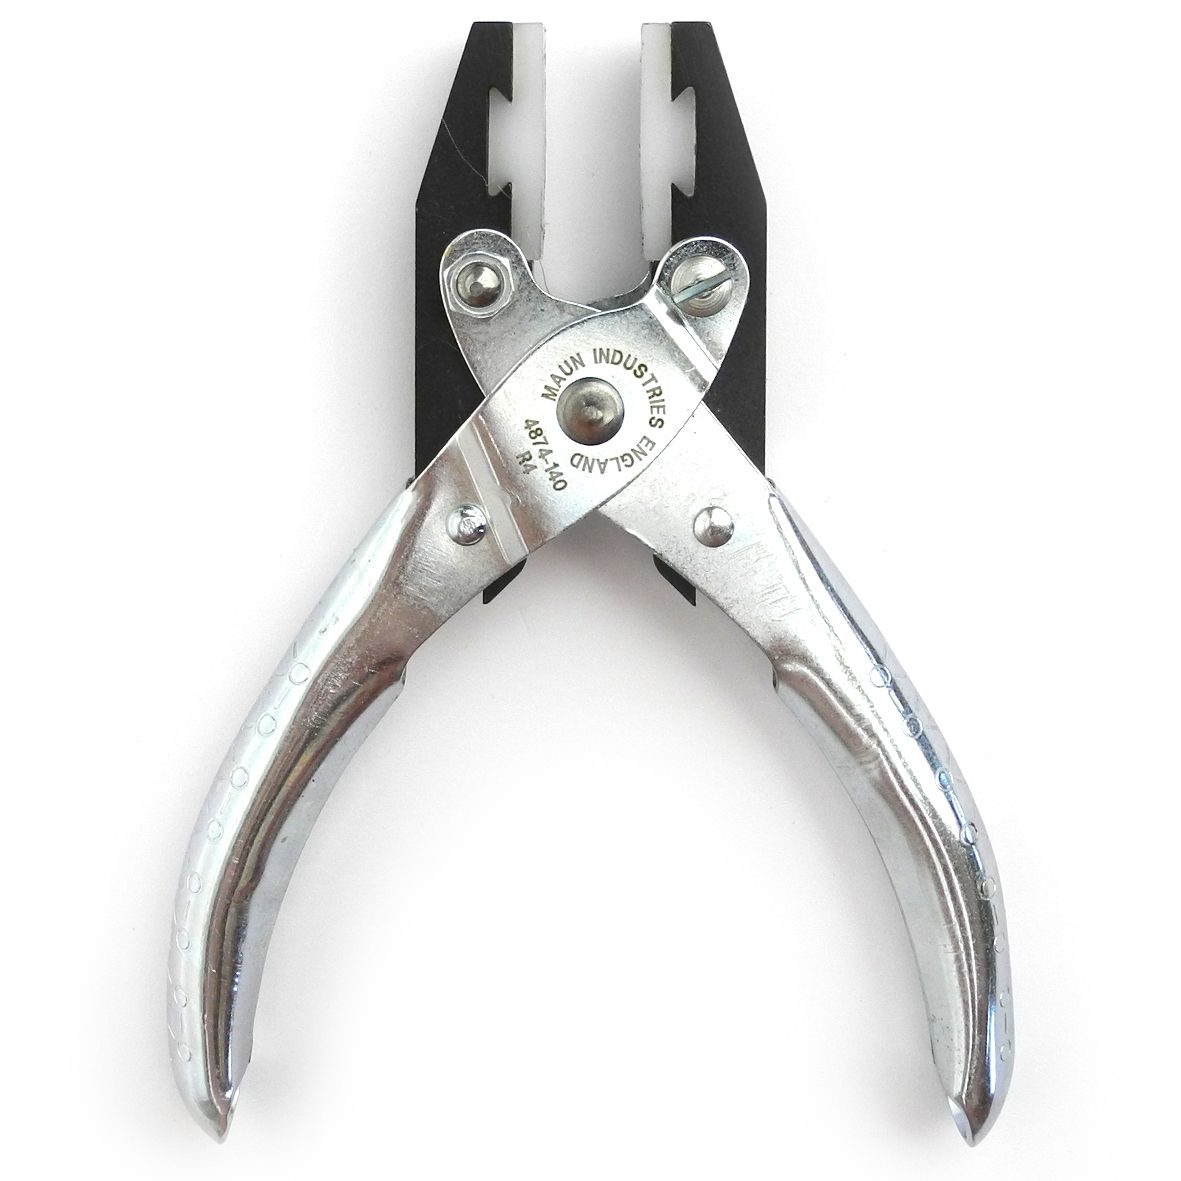 Soft Jaw Pliers, 125mm, Flat Nose, Parallel-Action - Maun